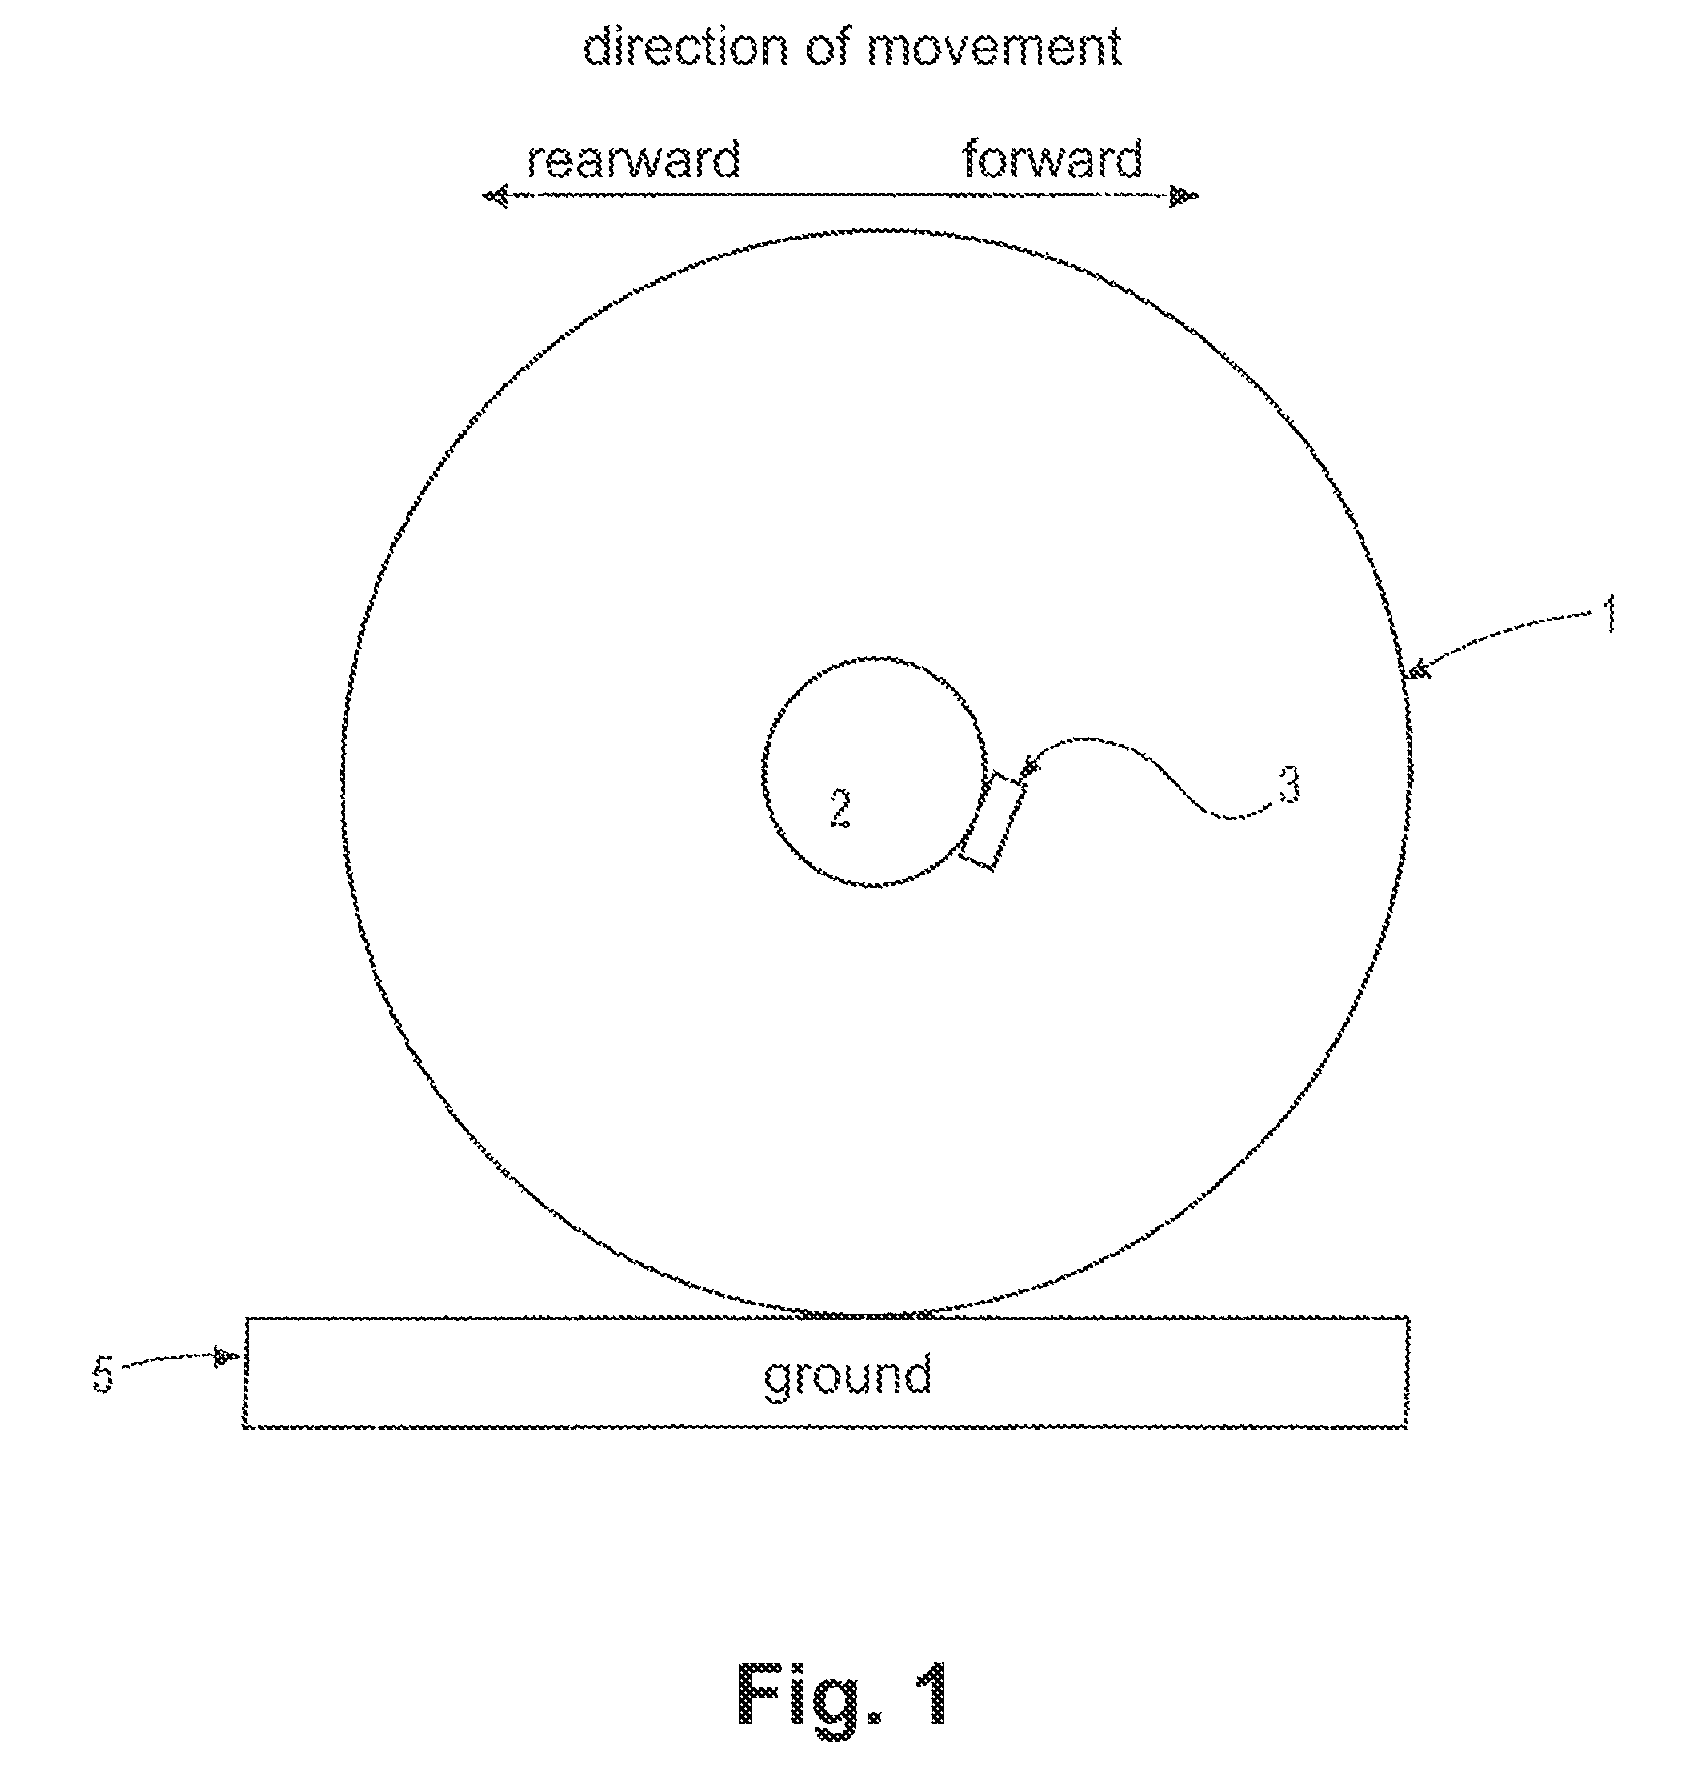 Device and method for a rail vehicle